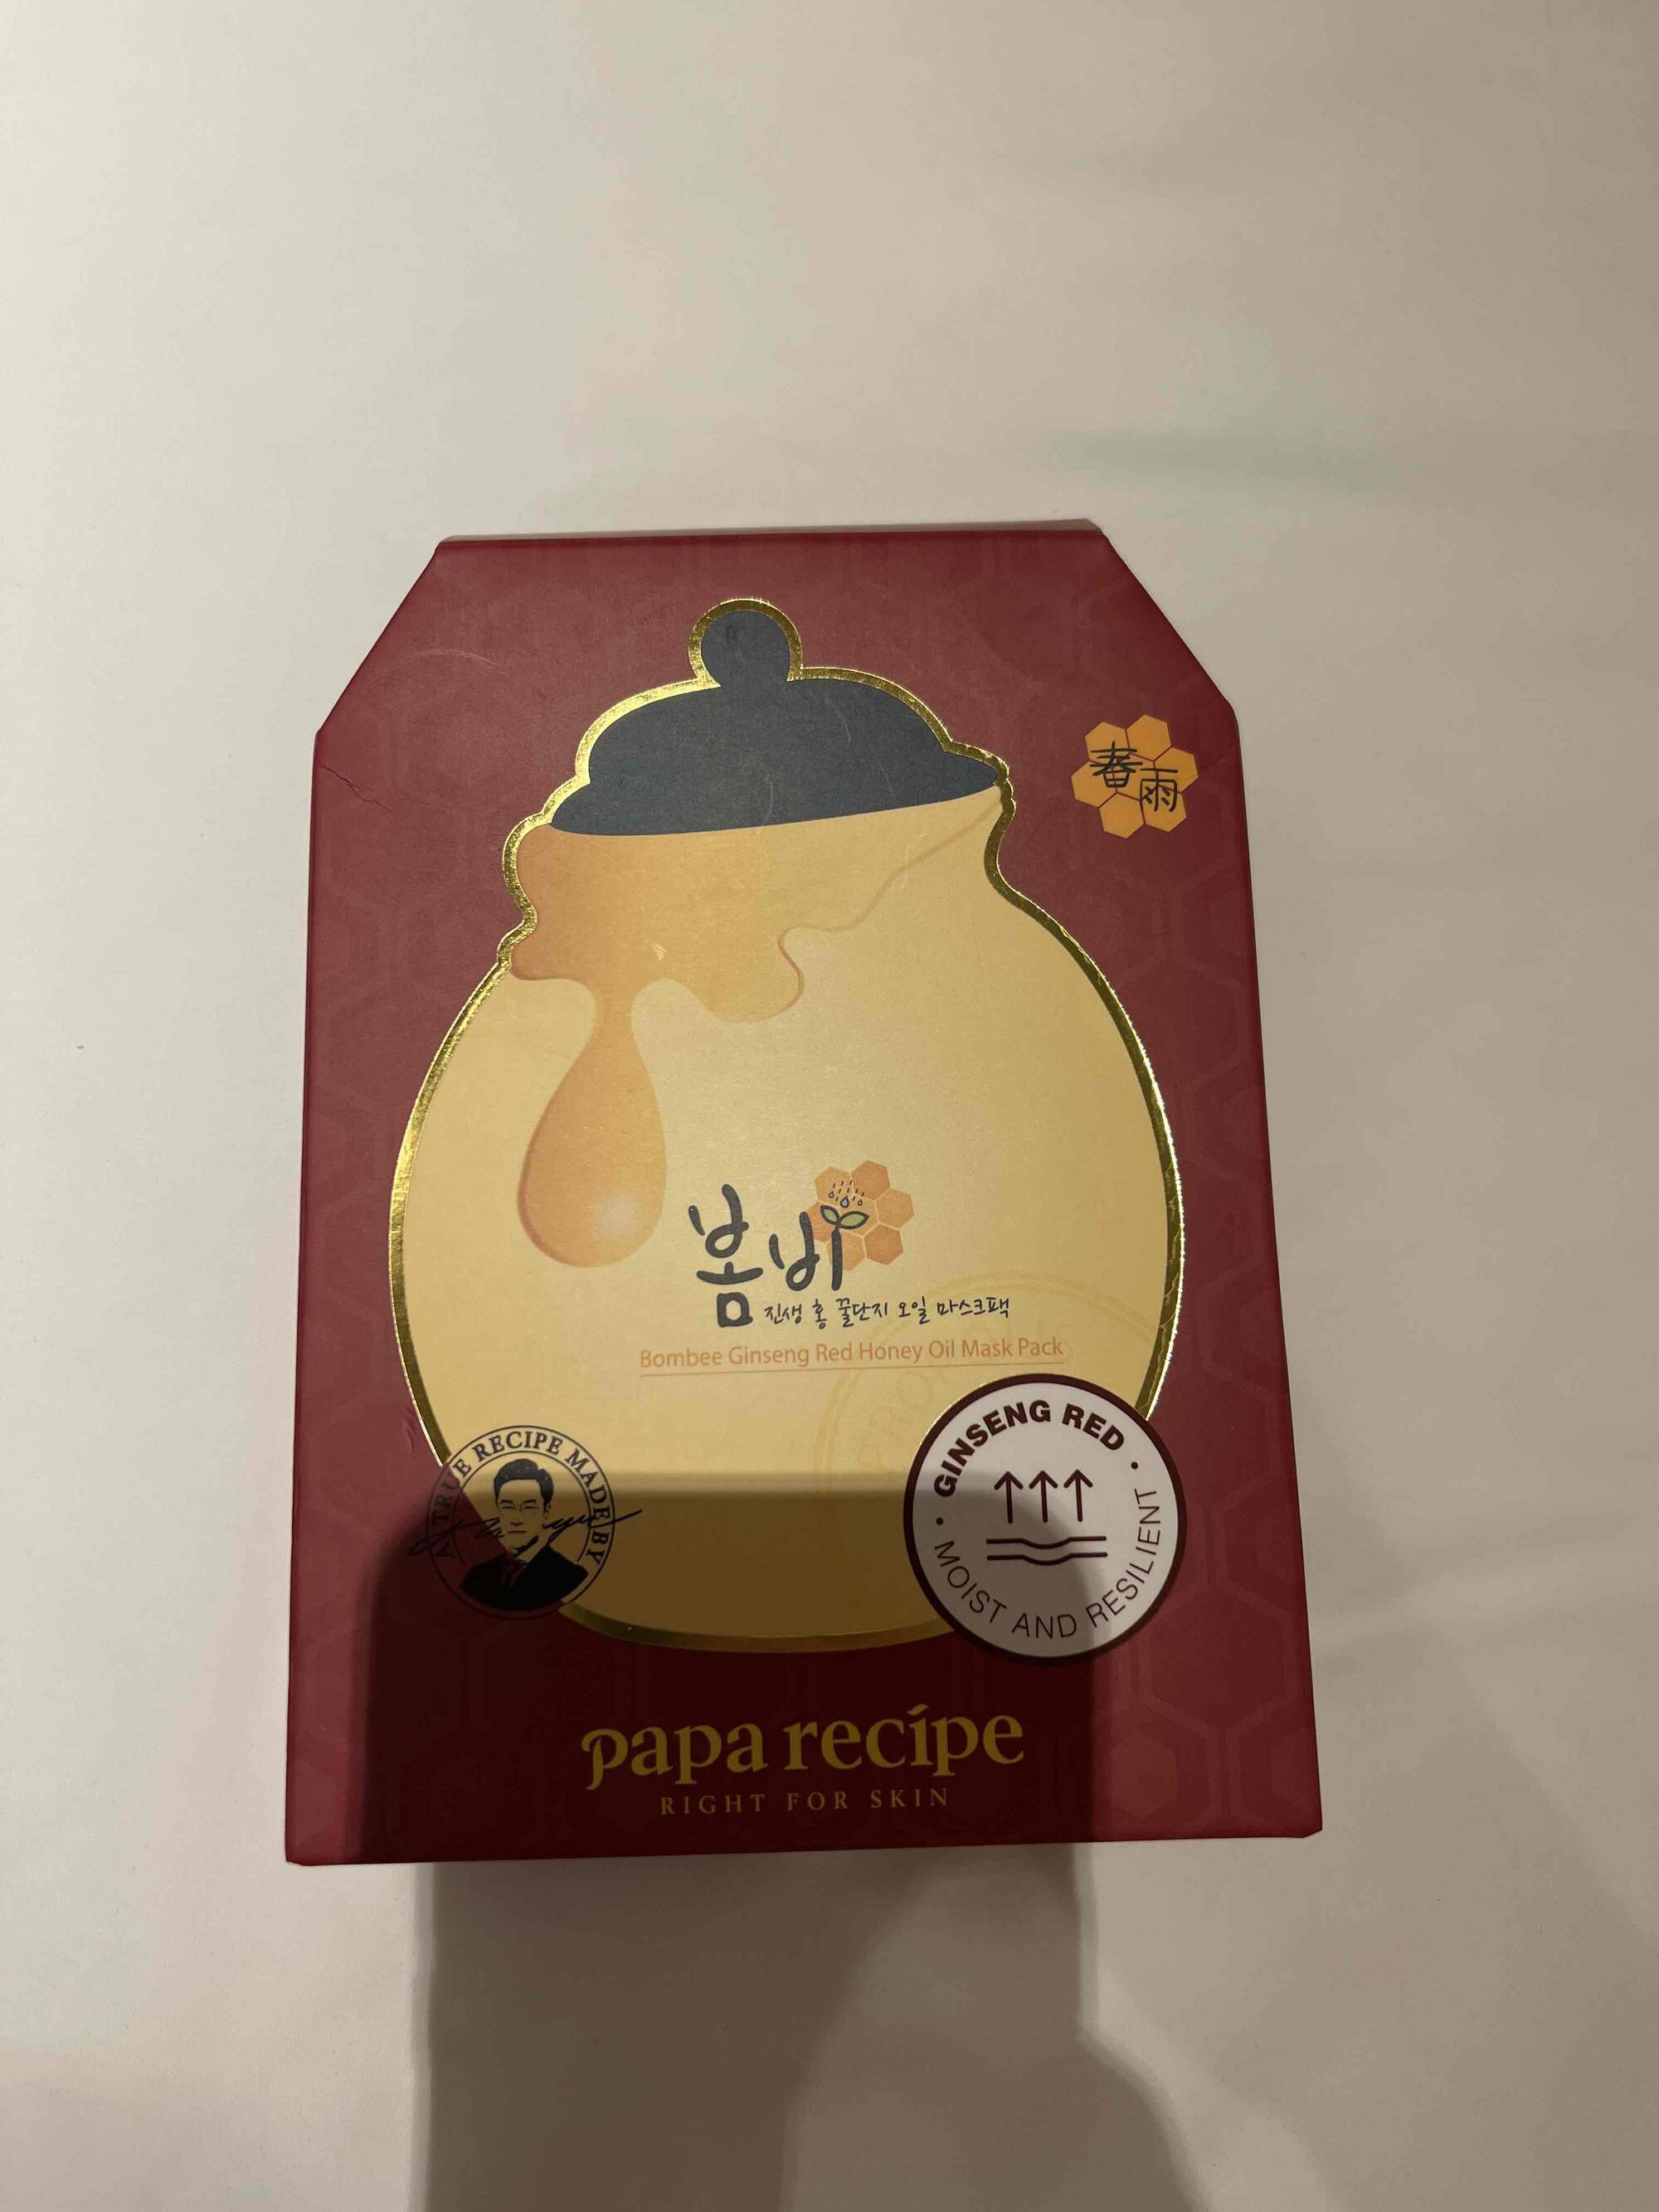 PAPA RECIPE - Bombee Ginseng Red honey Oil mask